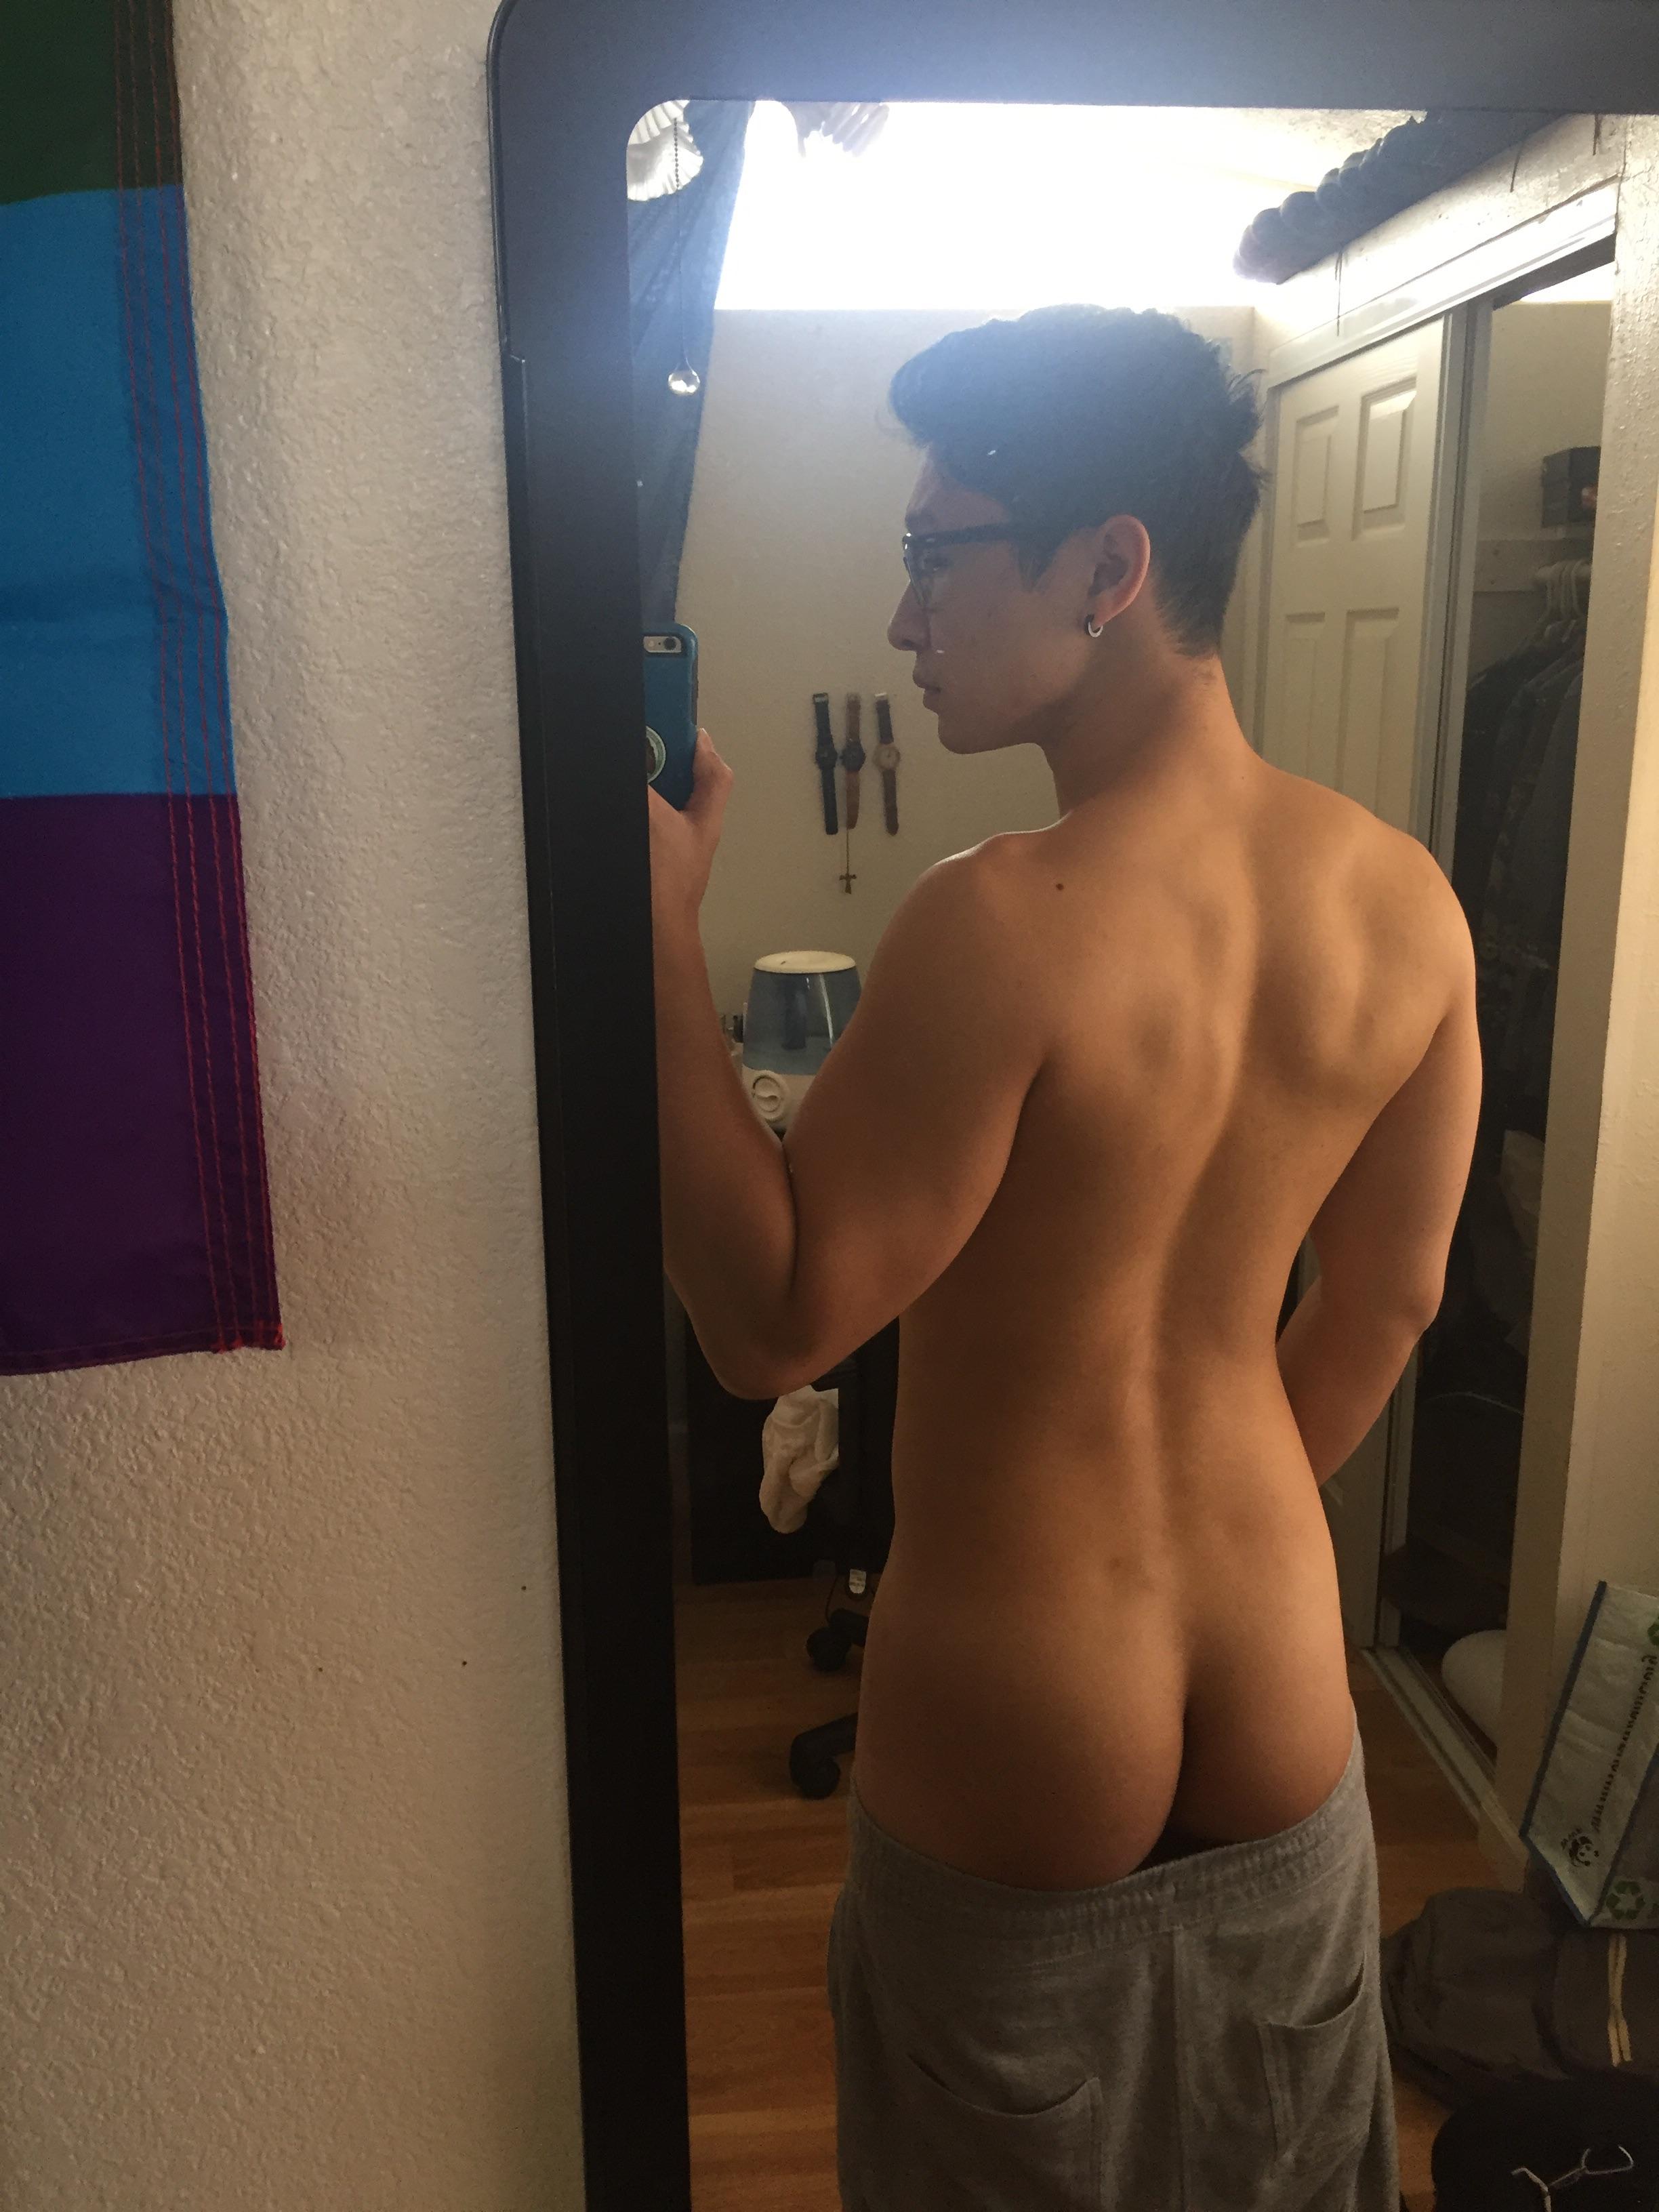 Here is my butt, again